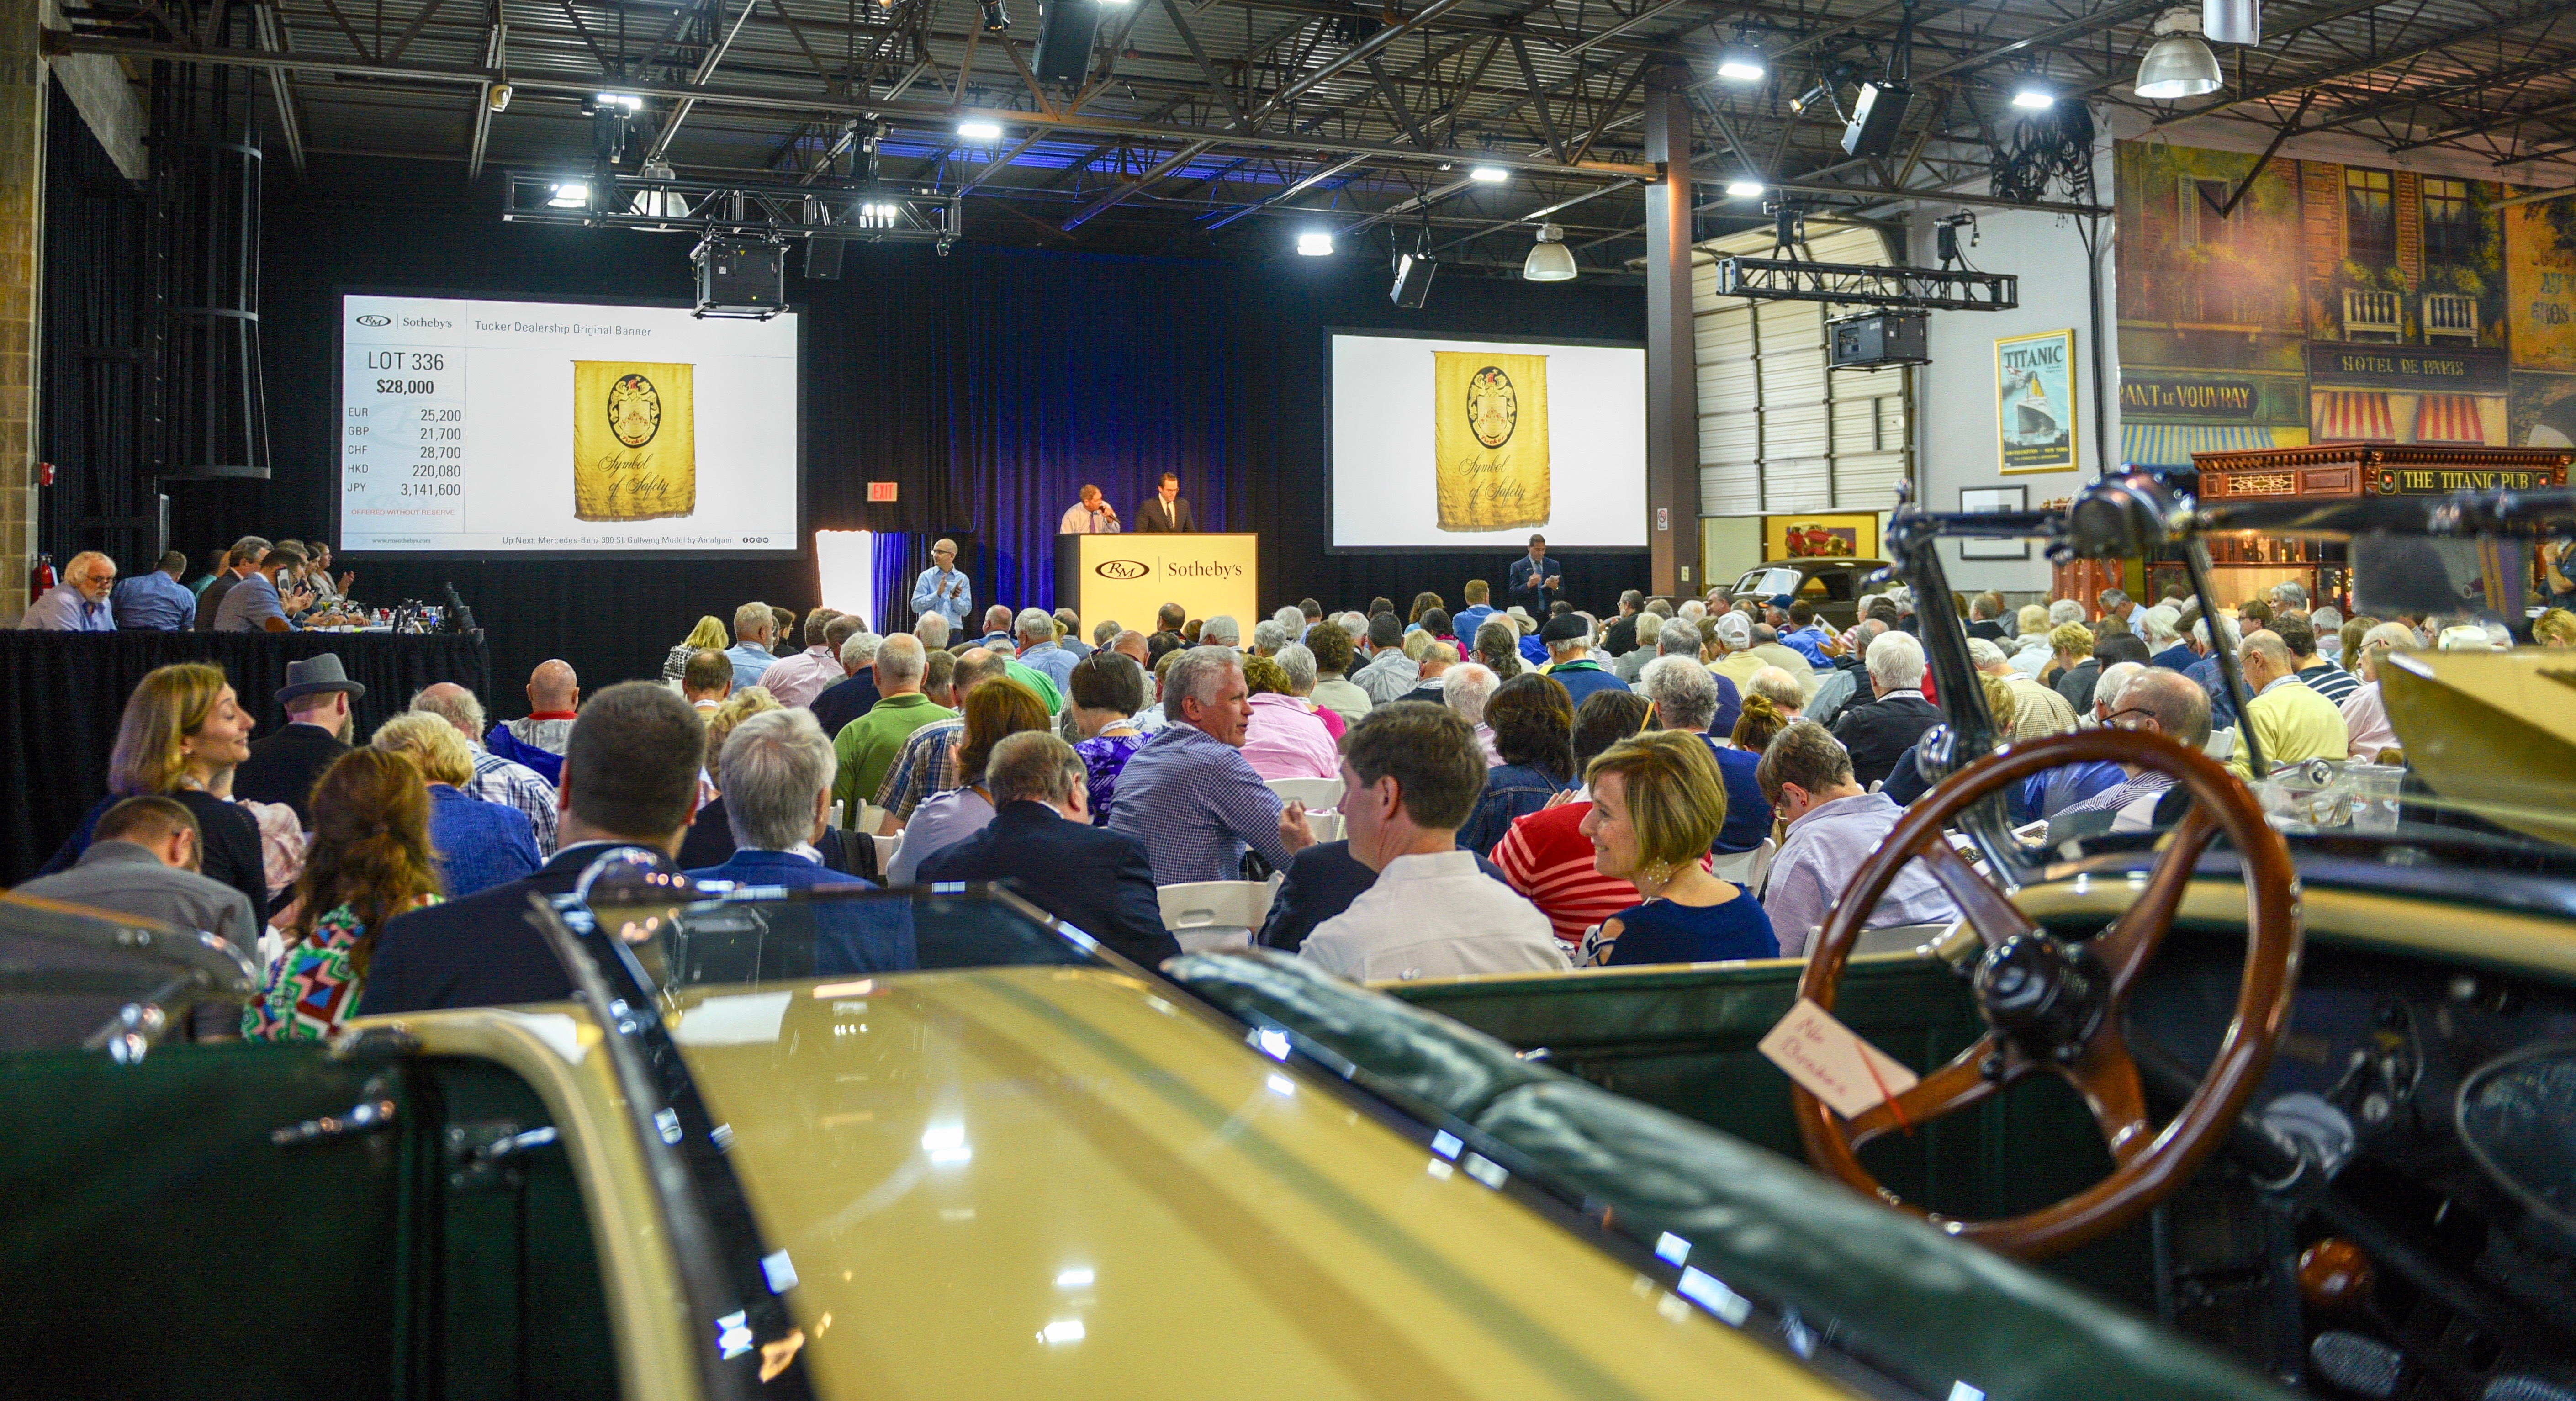 Guyton Collection, Guyton Collection exceeds expectations with $11.7 million sale, ClassicCars.com Journal